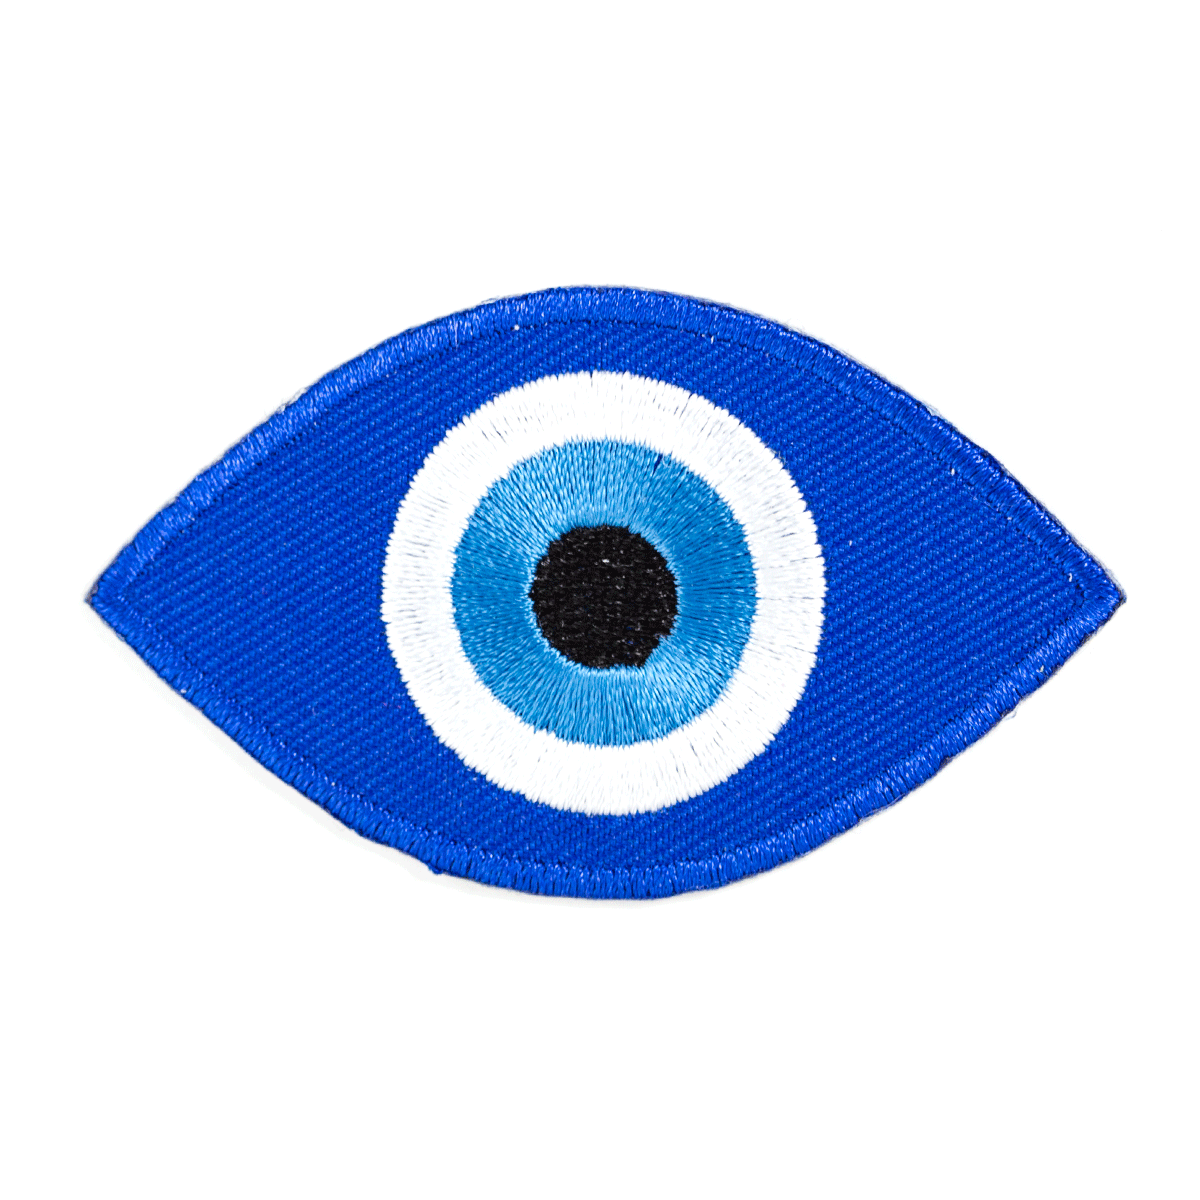 Evil Eye Embroidered Iron-On Patch - Spiral Circle